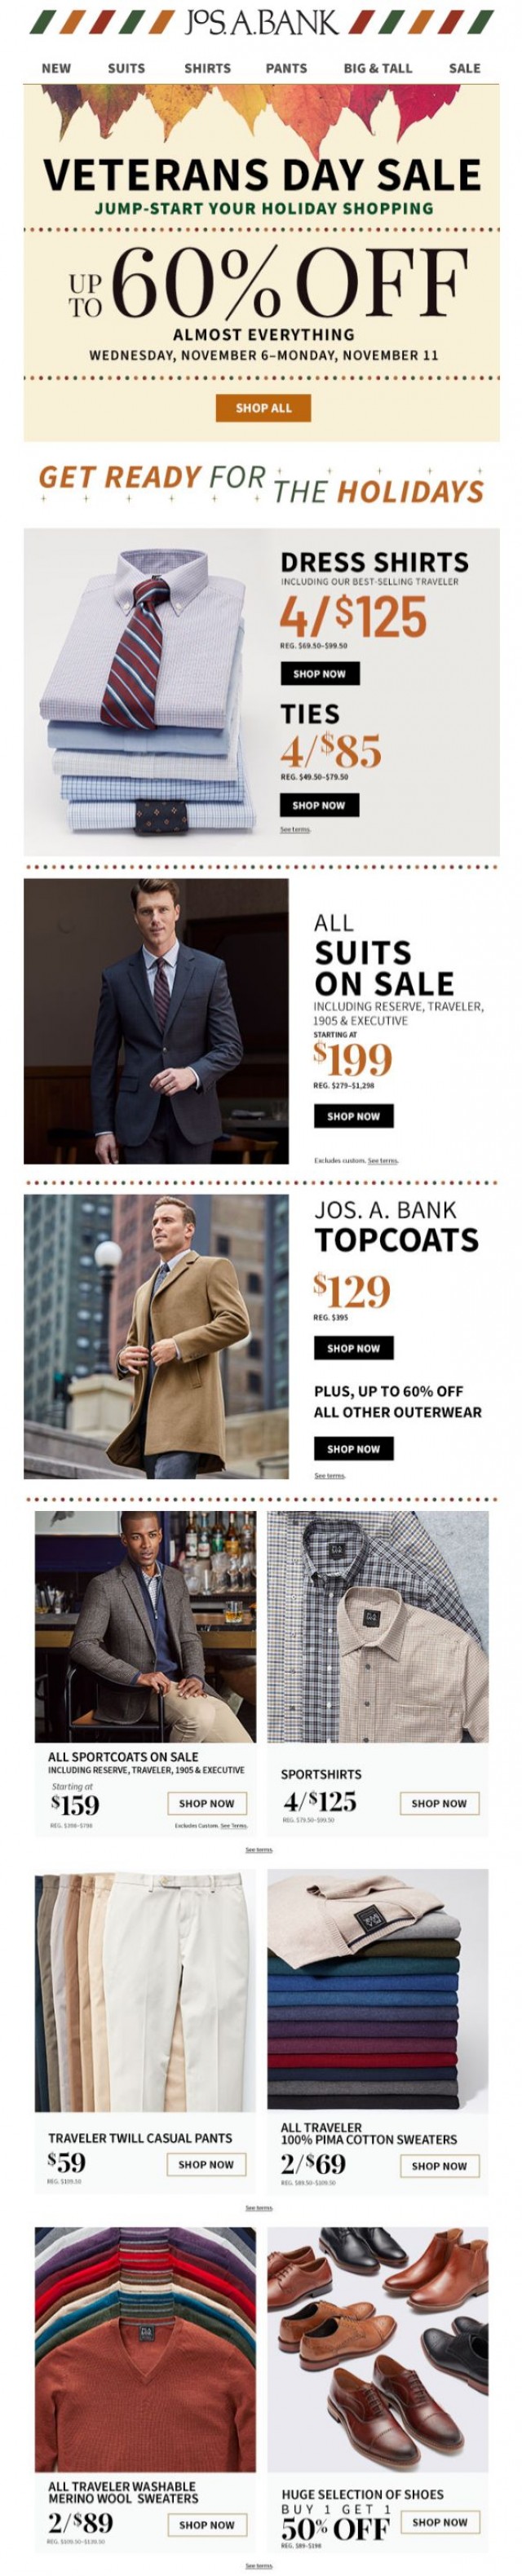 Coupon for: Jos. A. Bank - 4 for $125 Dress Shirts + 4 for $85 Ties + $199 Suits